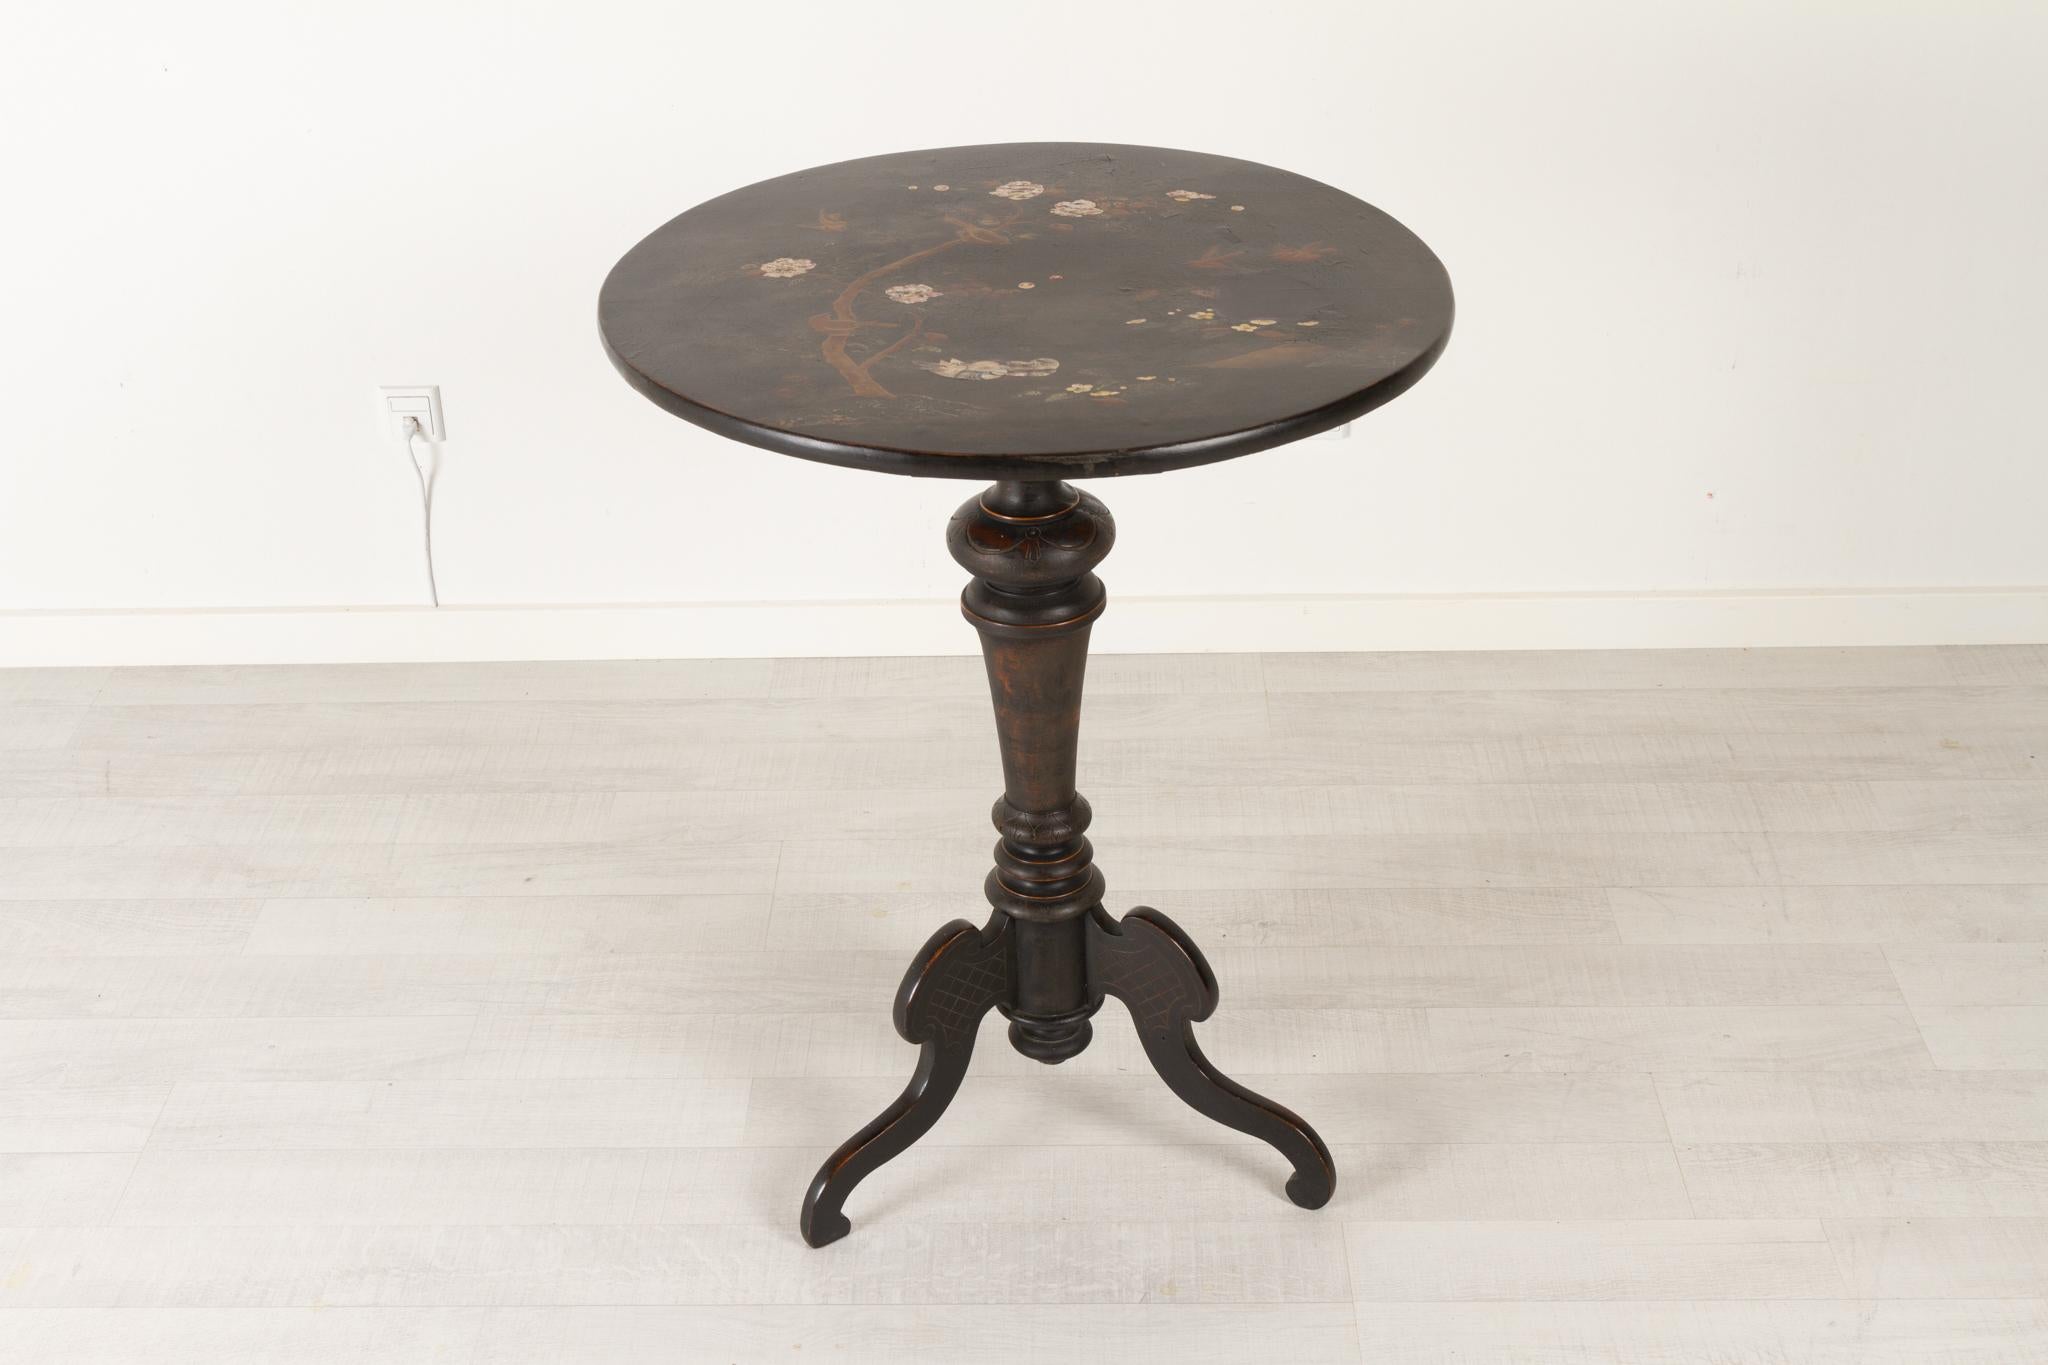 Chinoiserie Antique Ebonized and Laquered Side Table, Late 1800s